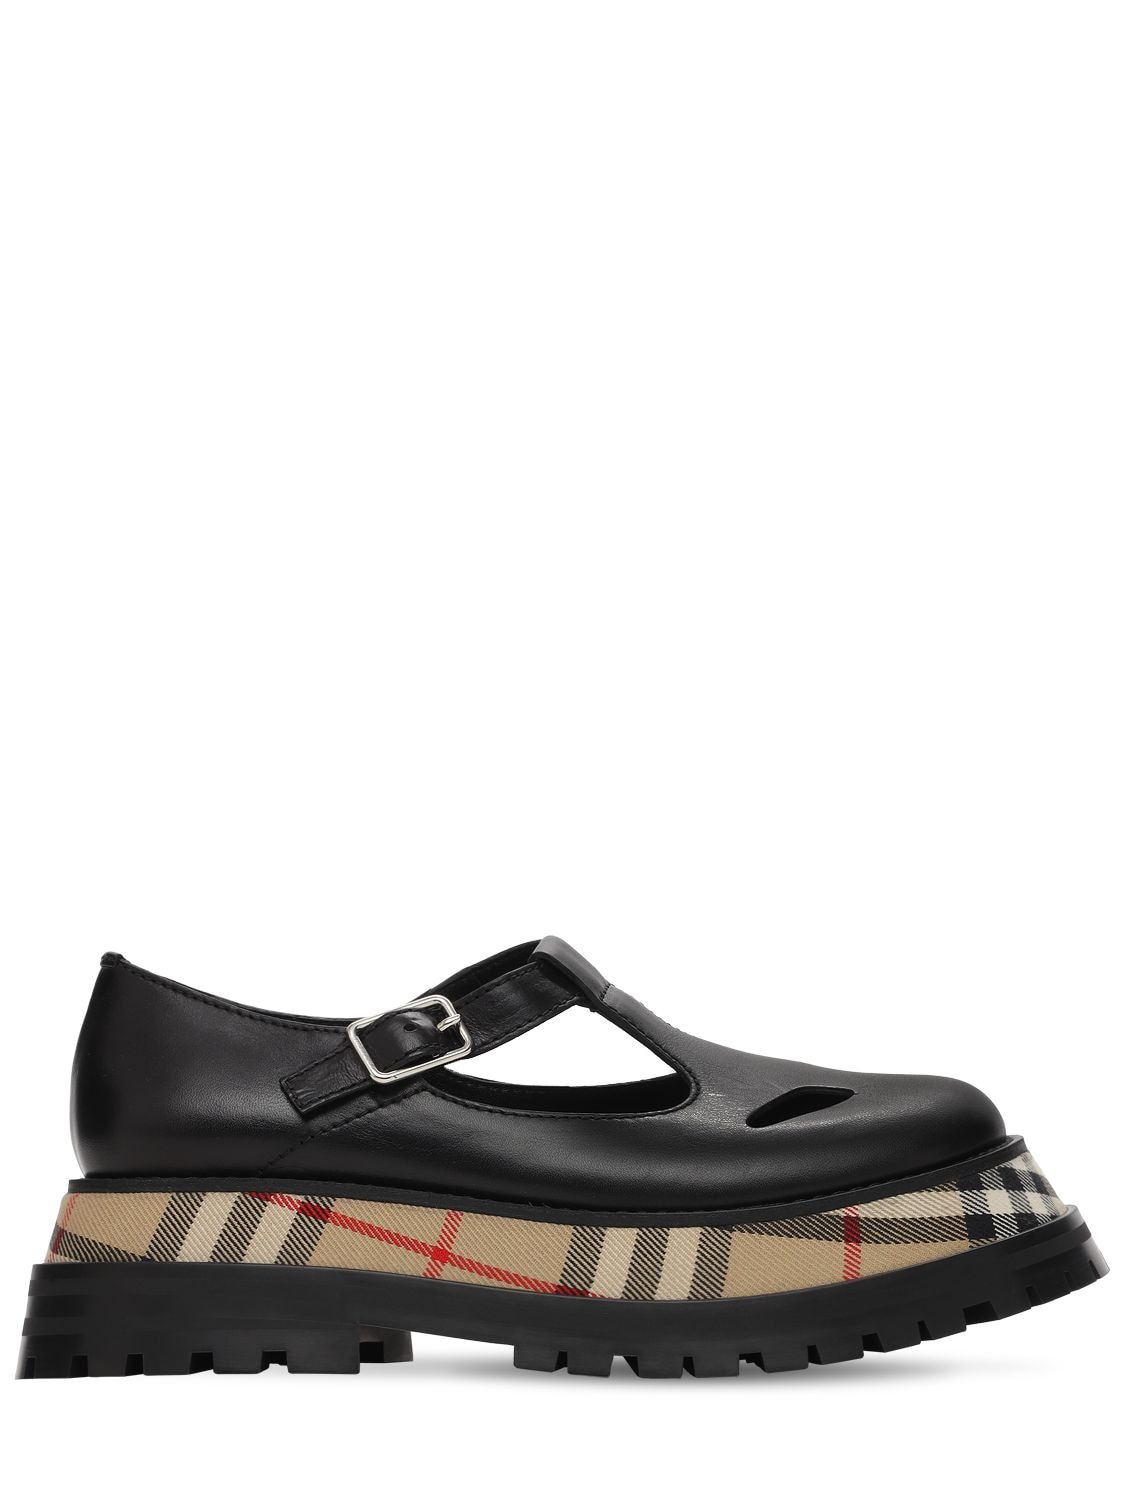 BURBERRY 40MM ALDWYCH LEATHER WEDGES,73IG4S013-QTEXODK1